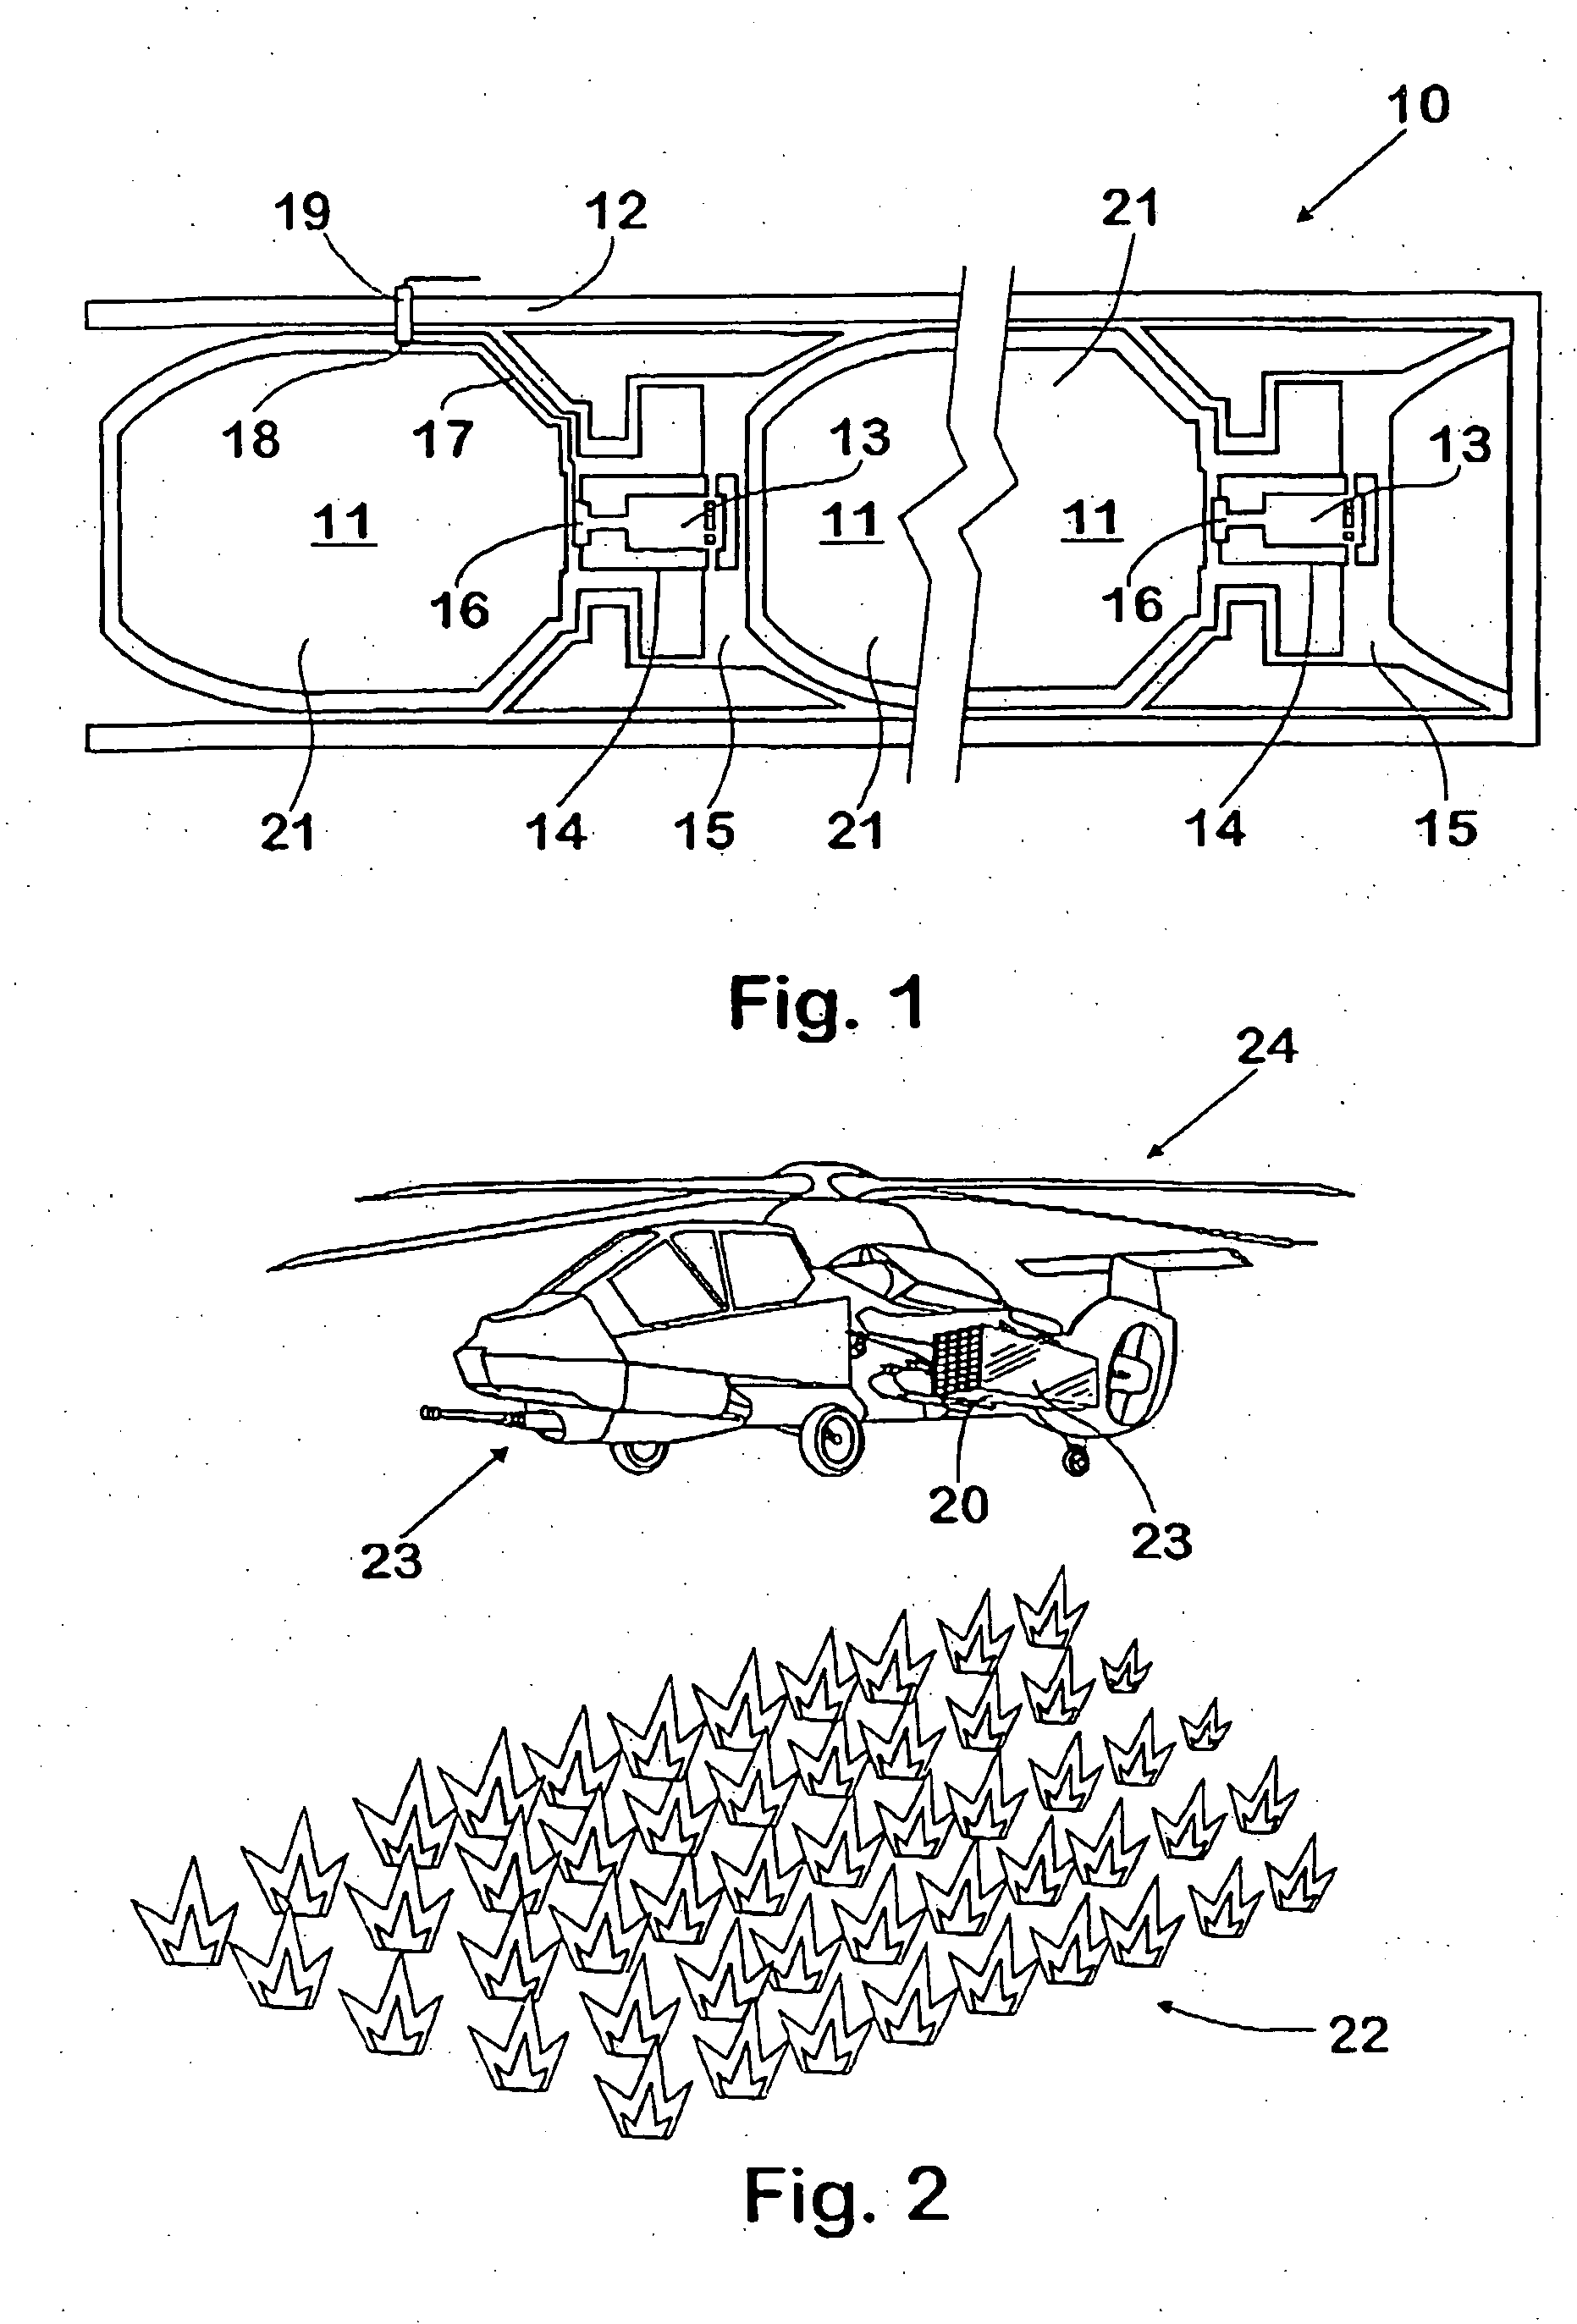 Projectile launching apparatus